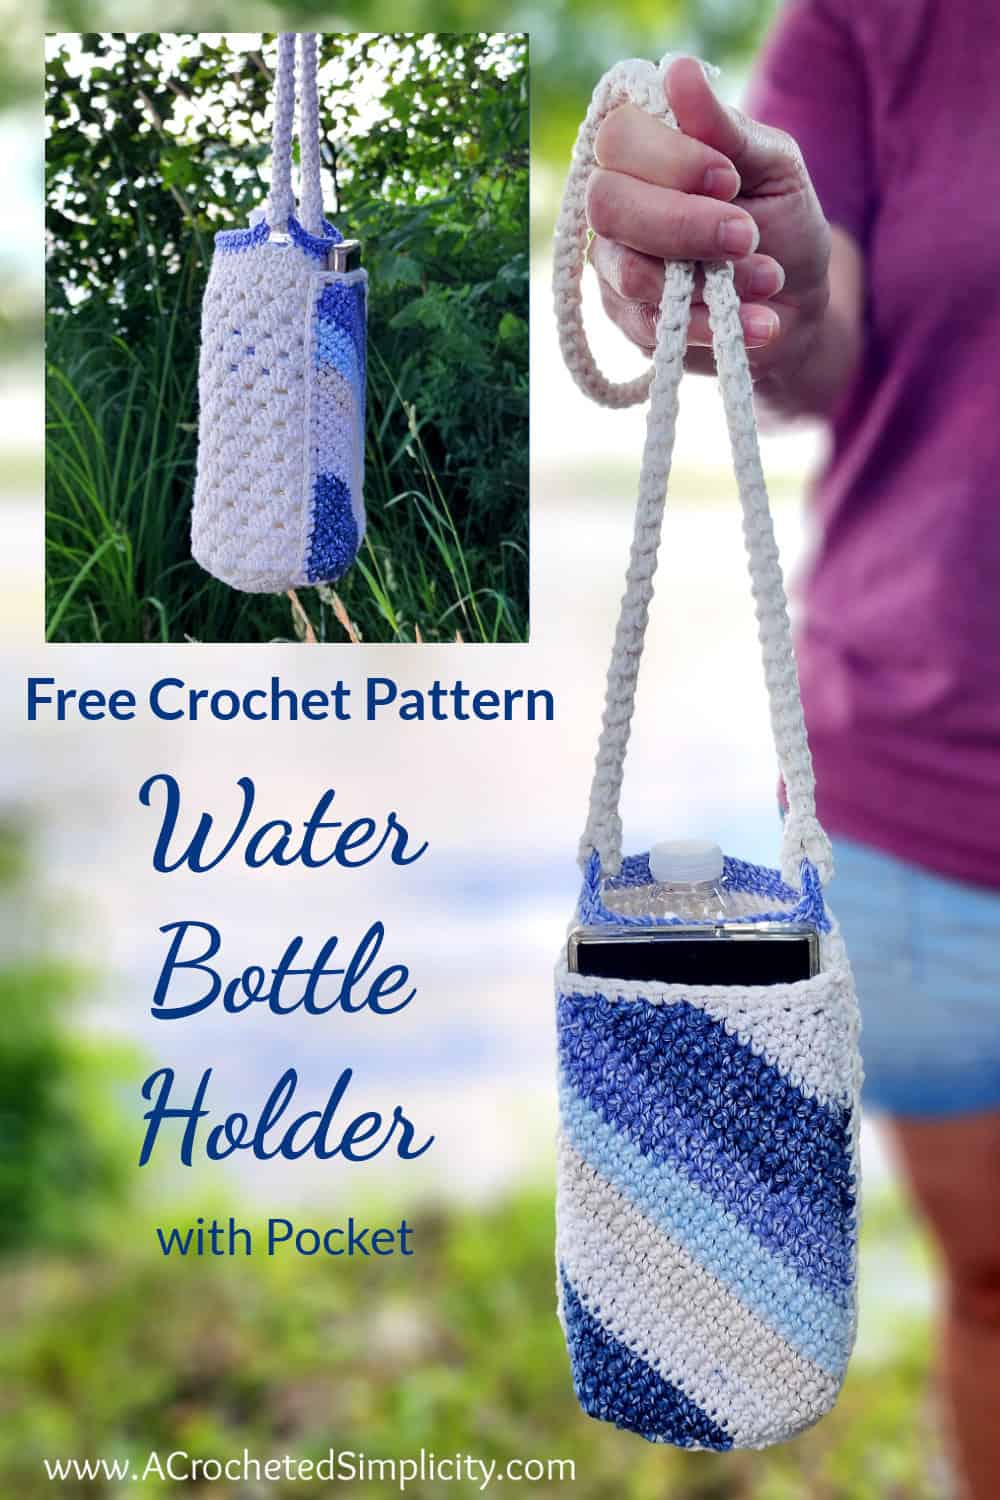 Woman holding and showing the front view of crochet water bottle holders with a pocket for cell phones.